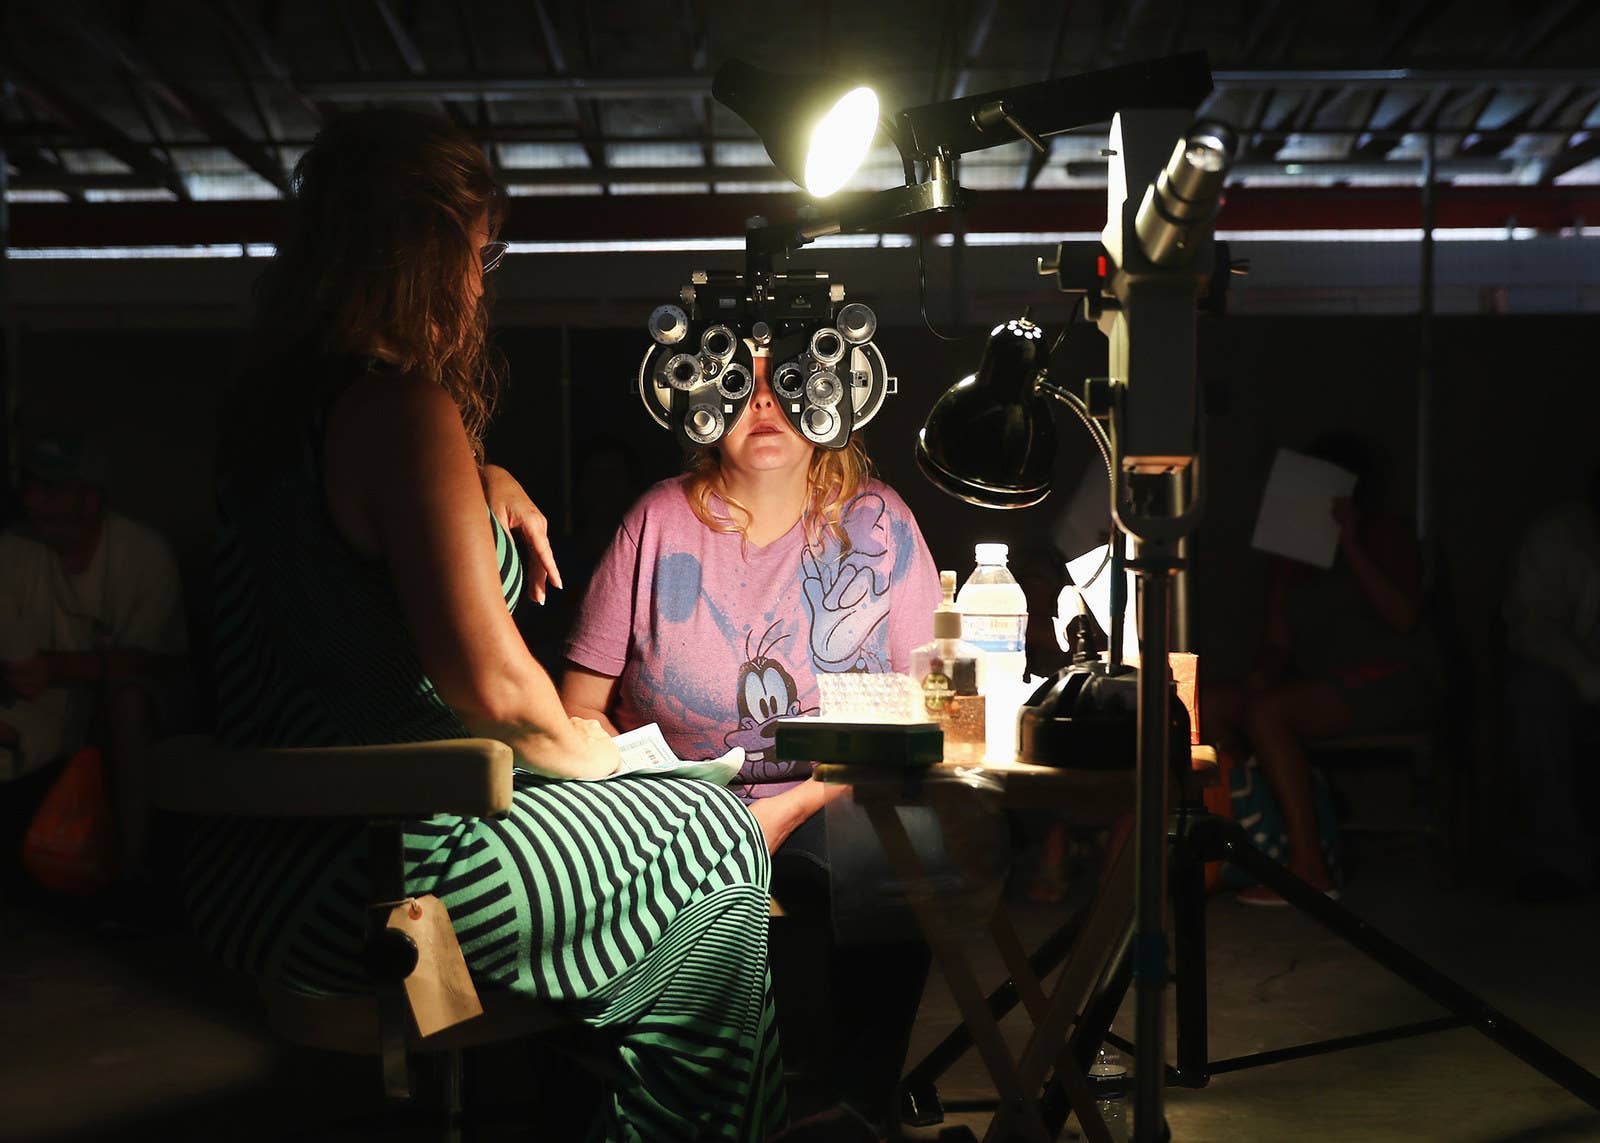 A volunteer checks a patient's vision at the RAM clinic in Wise on July 21.